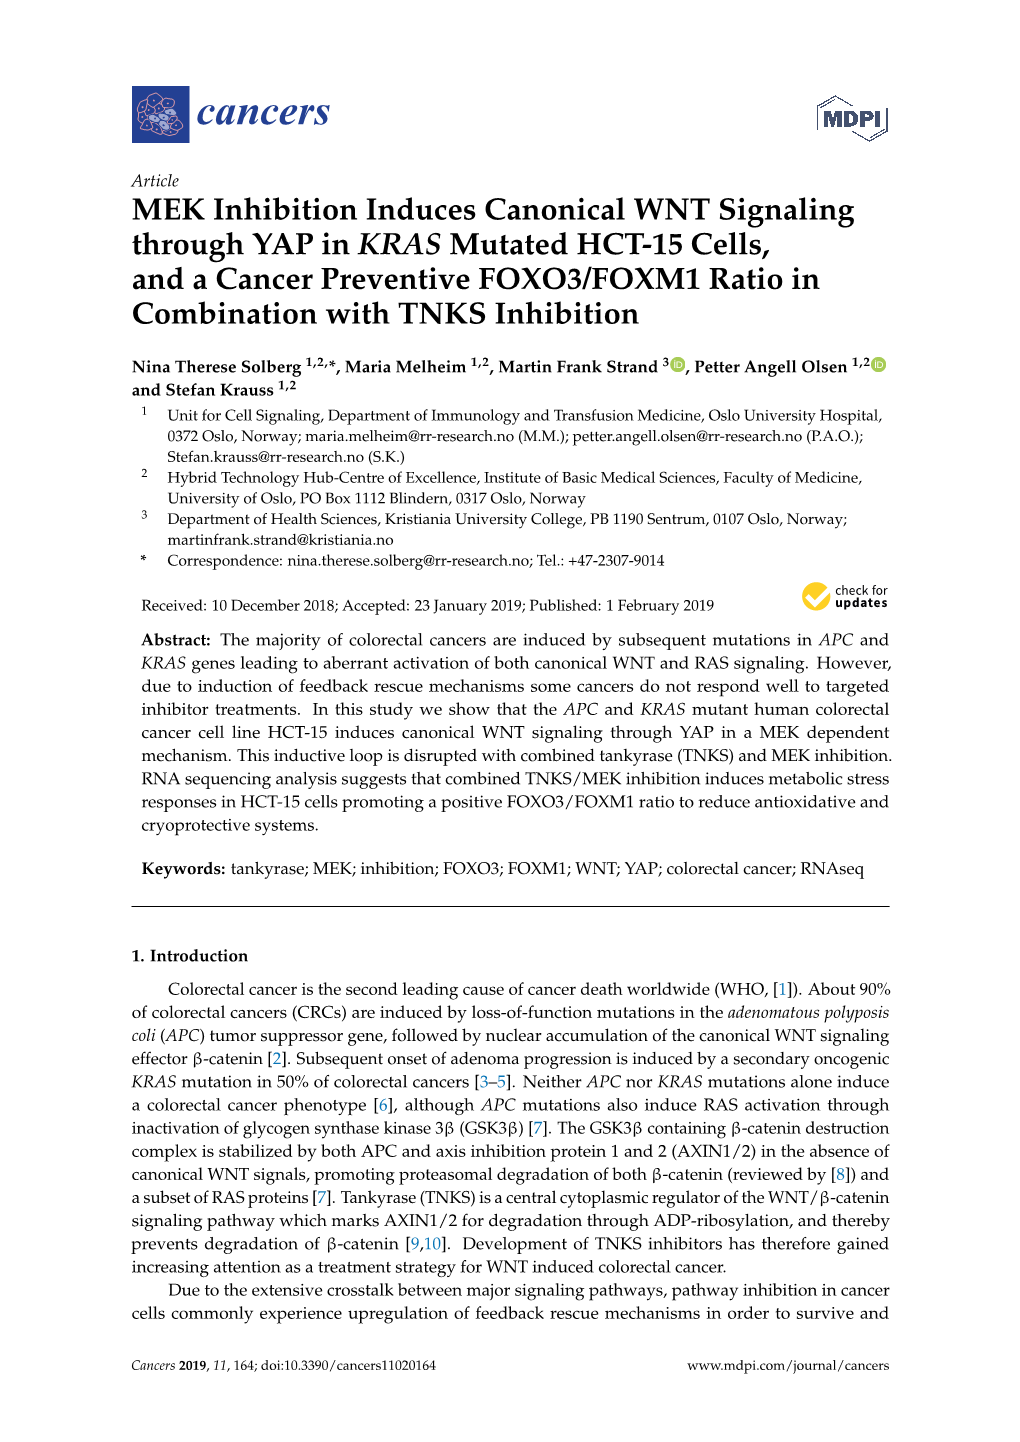 MEK Inhibition Induces Canonical WNT Signaling Through YAP in KRAS Mutated HCT-15 Cells, and a Cancer Preventive FOXO3/FOXM1 Ratio in Combination with TNKS Inhibition